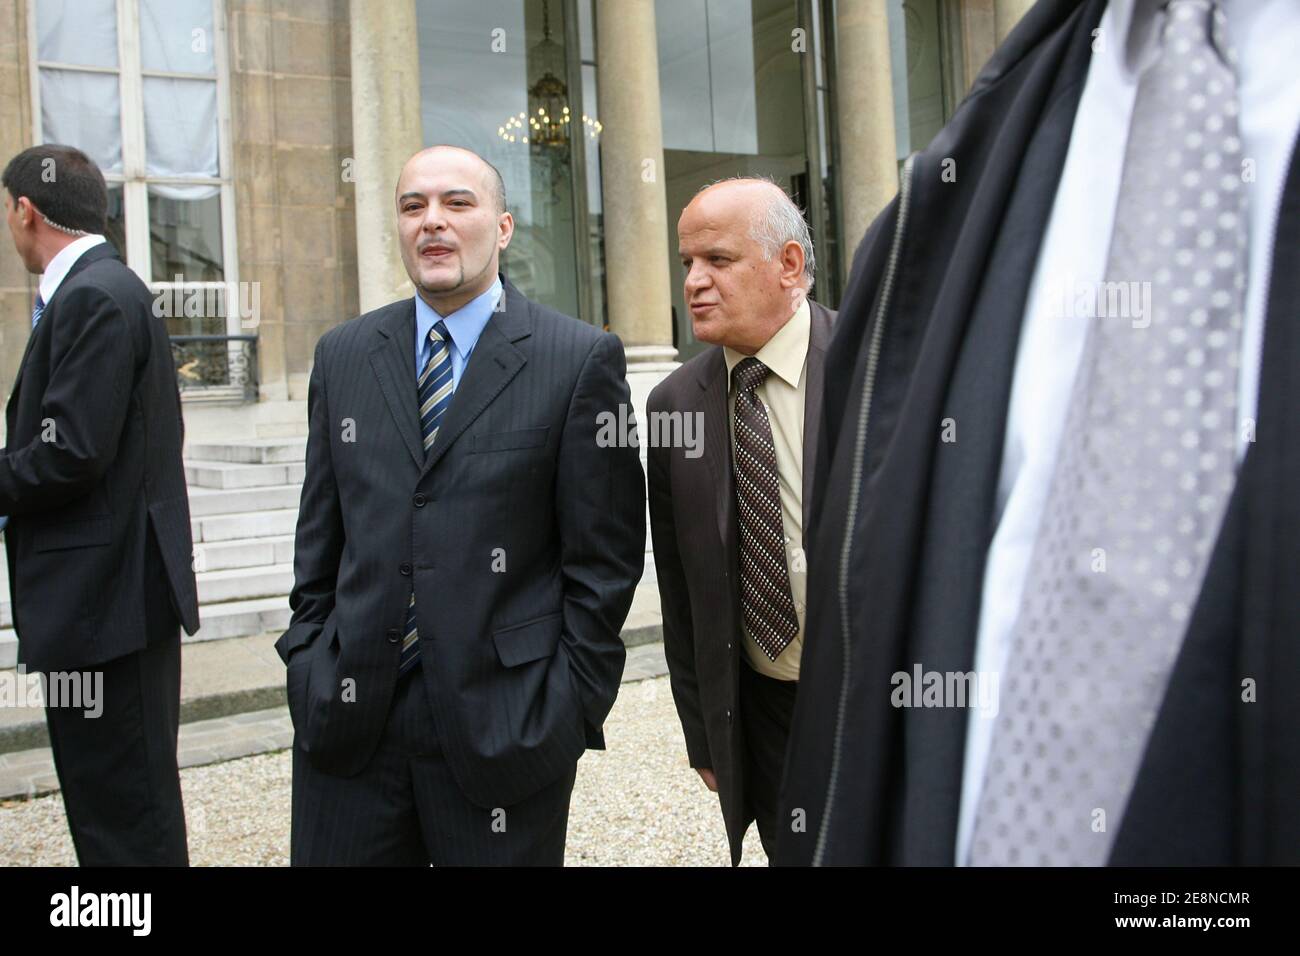 Enis'father, Mustapha Kocakurt, accompanied with his own father Turan, speak to the media after their private meeting with President Nicolas Sarkozy at the Elysee Palace in Paris, France on August 20, 2007. Enis was kidnaped and raped by a serial paedophile, who was just released from jail, last week. Photo by Mehdi Taamallah/ABACAPRESS.COM Stock Photo